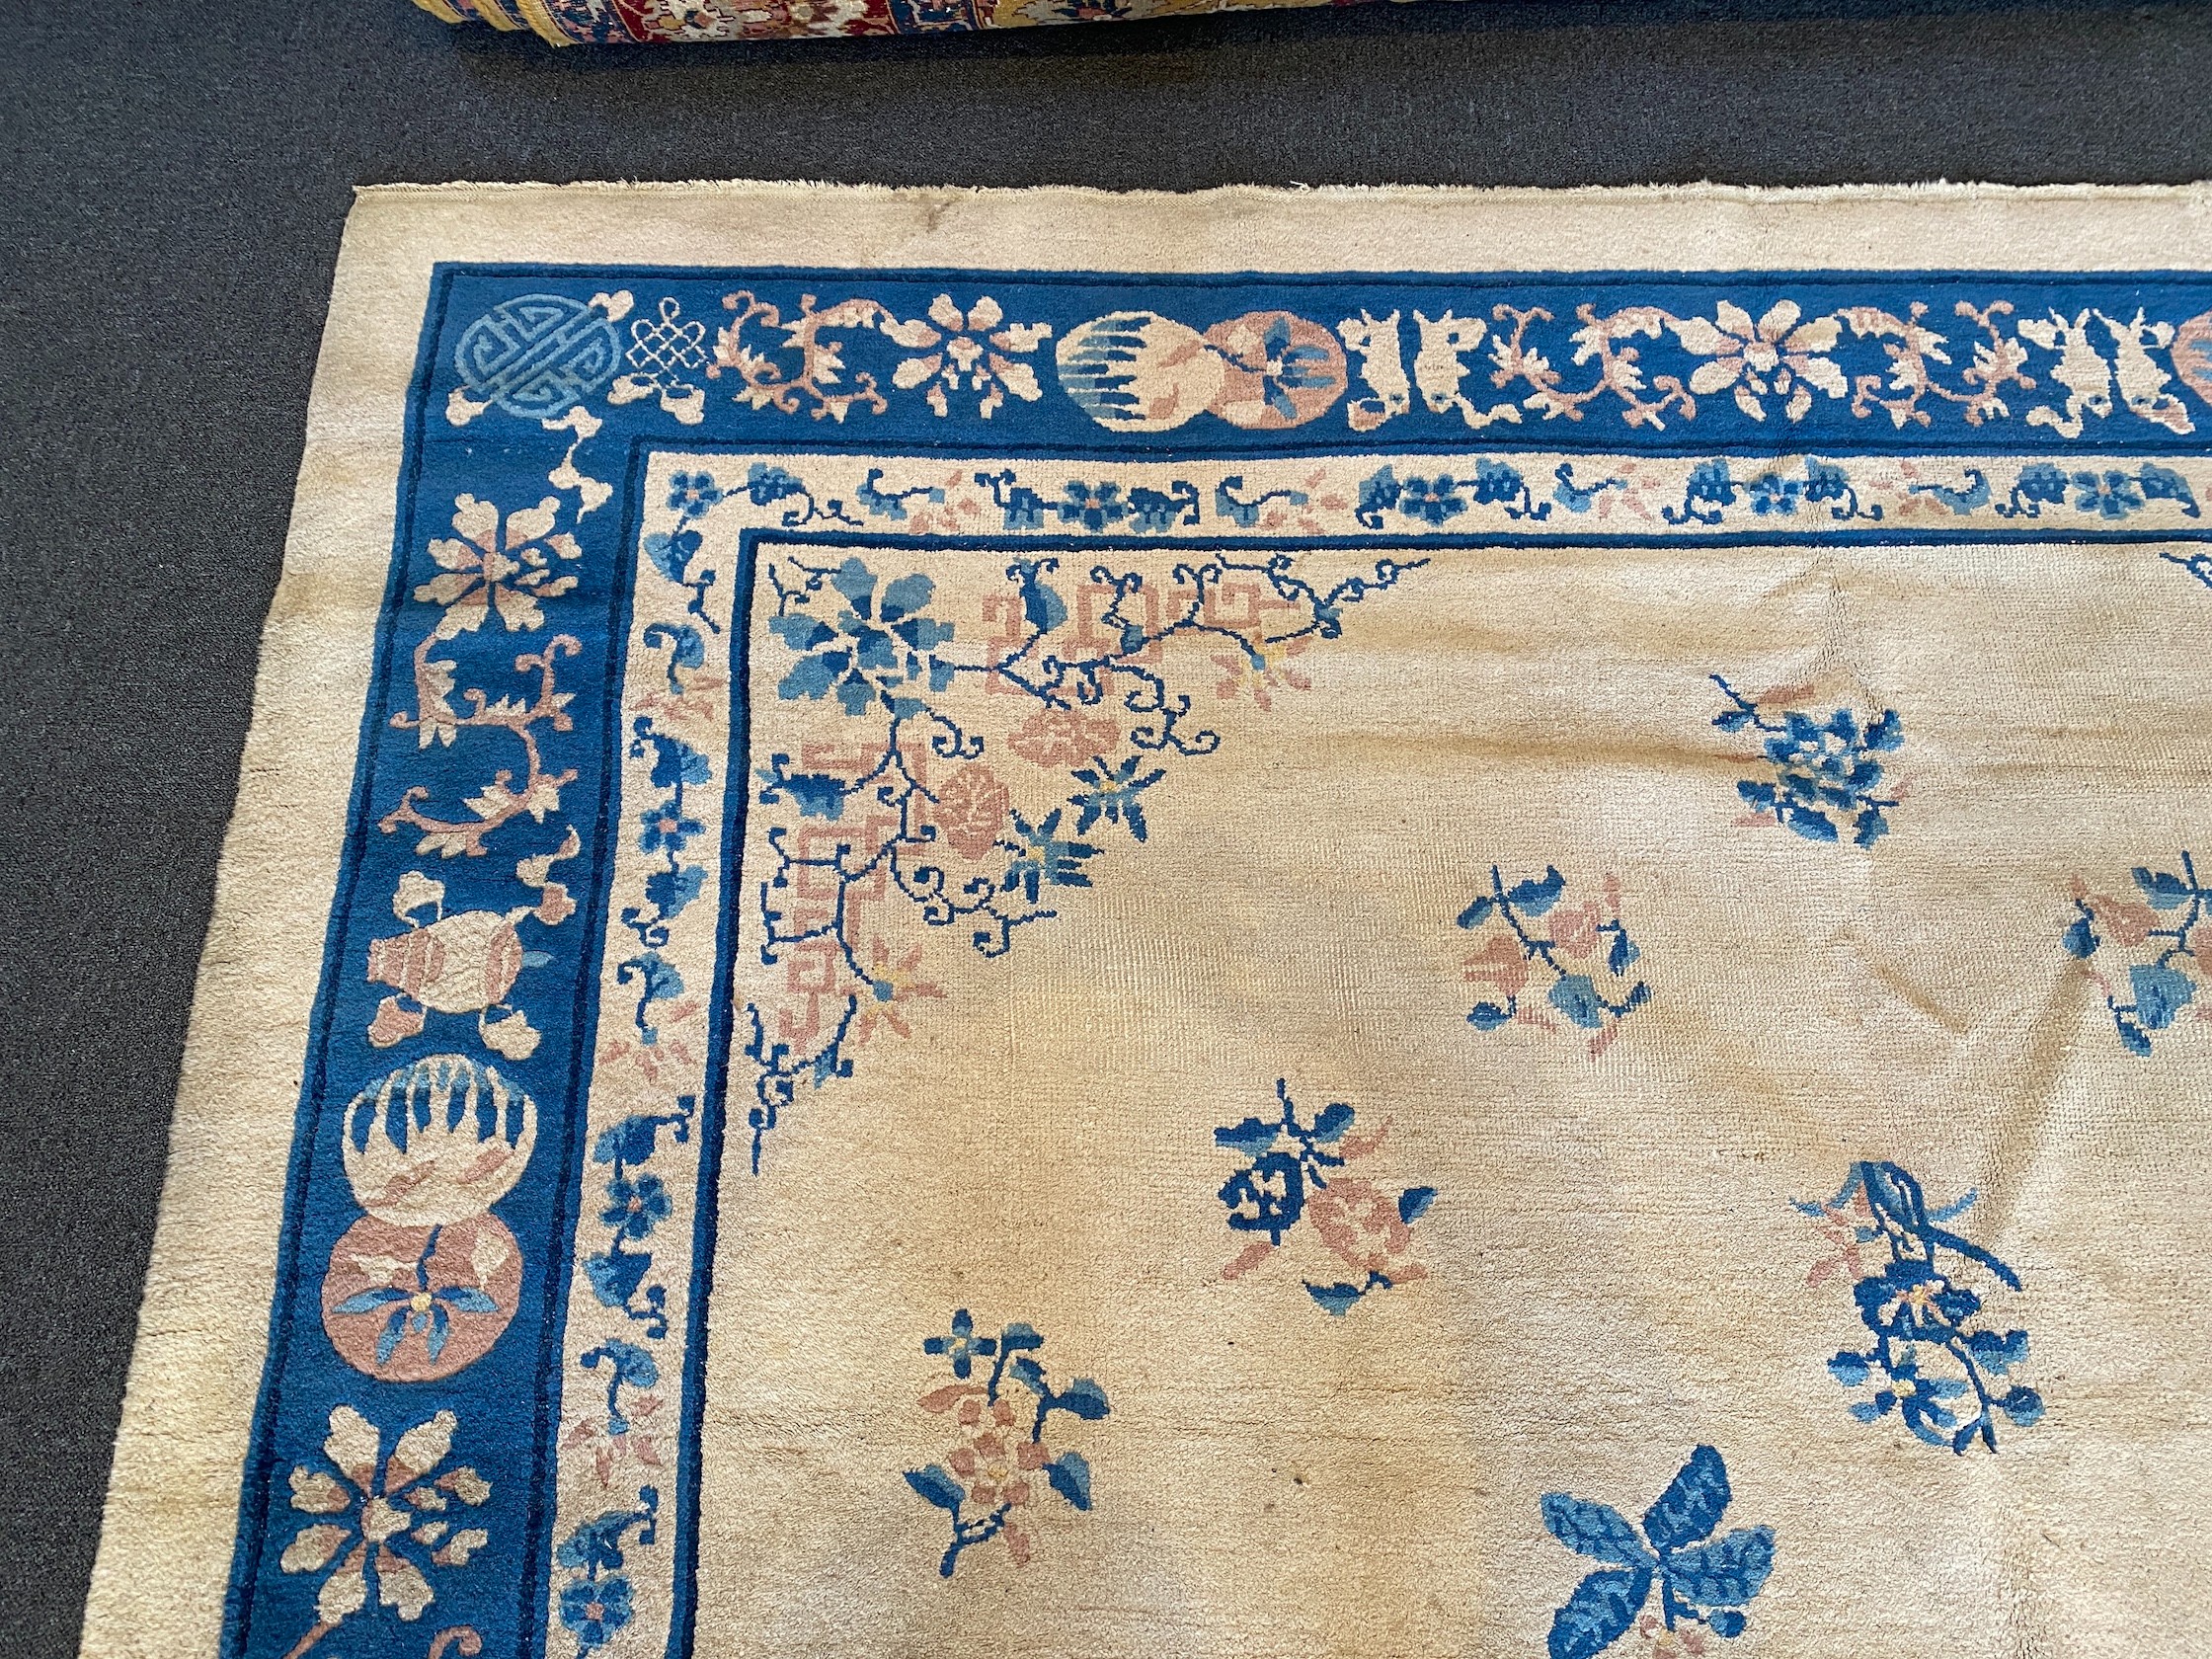 A Chinese ivory ground carpet with scattered floral field 368 x 284 cms